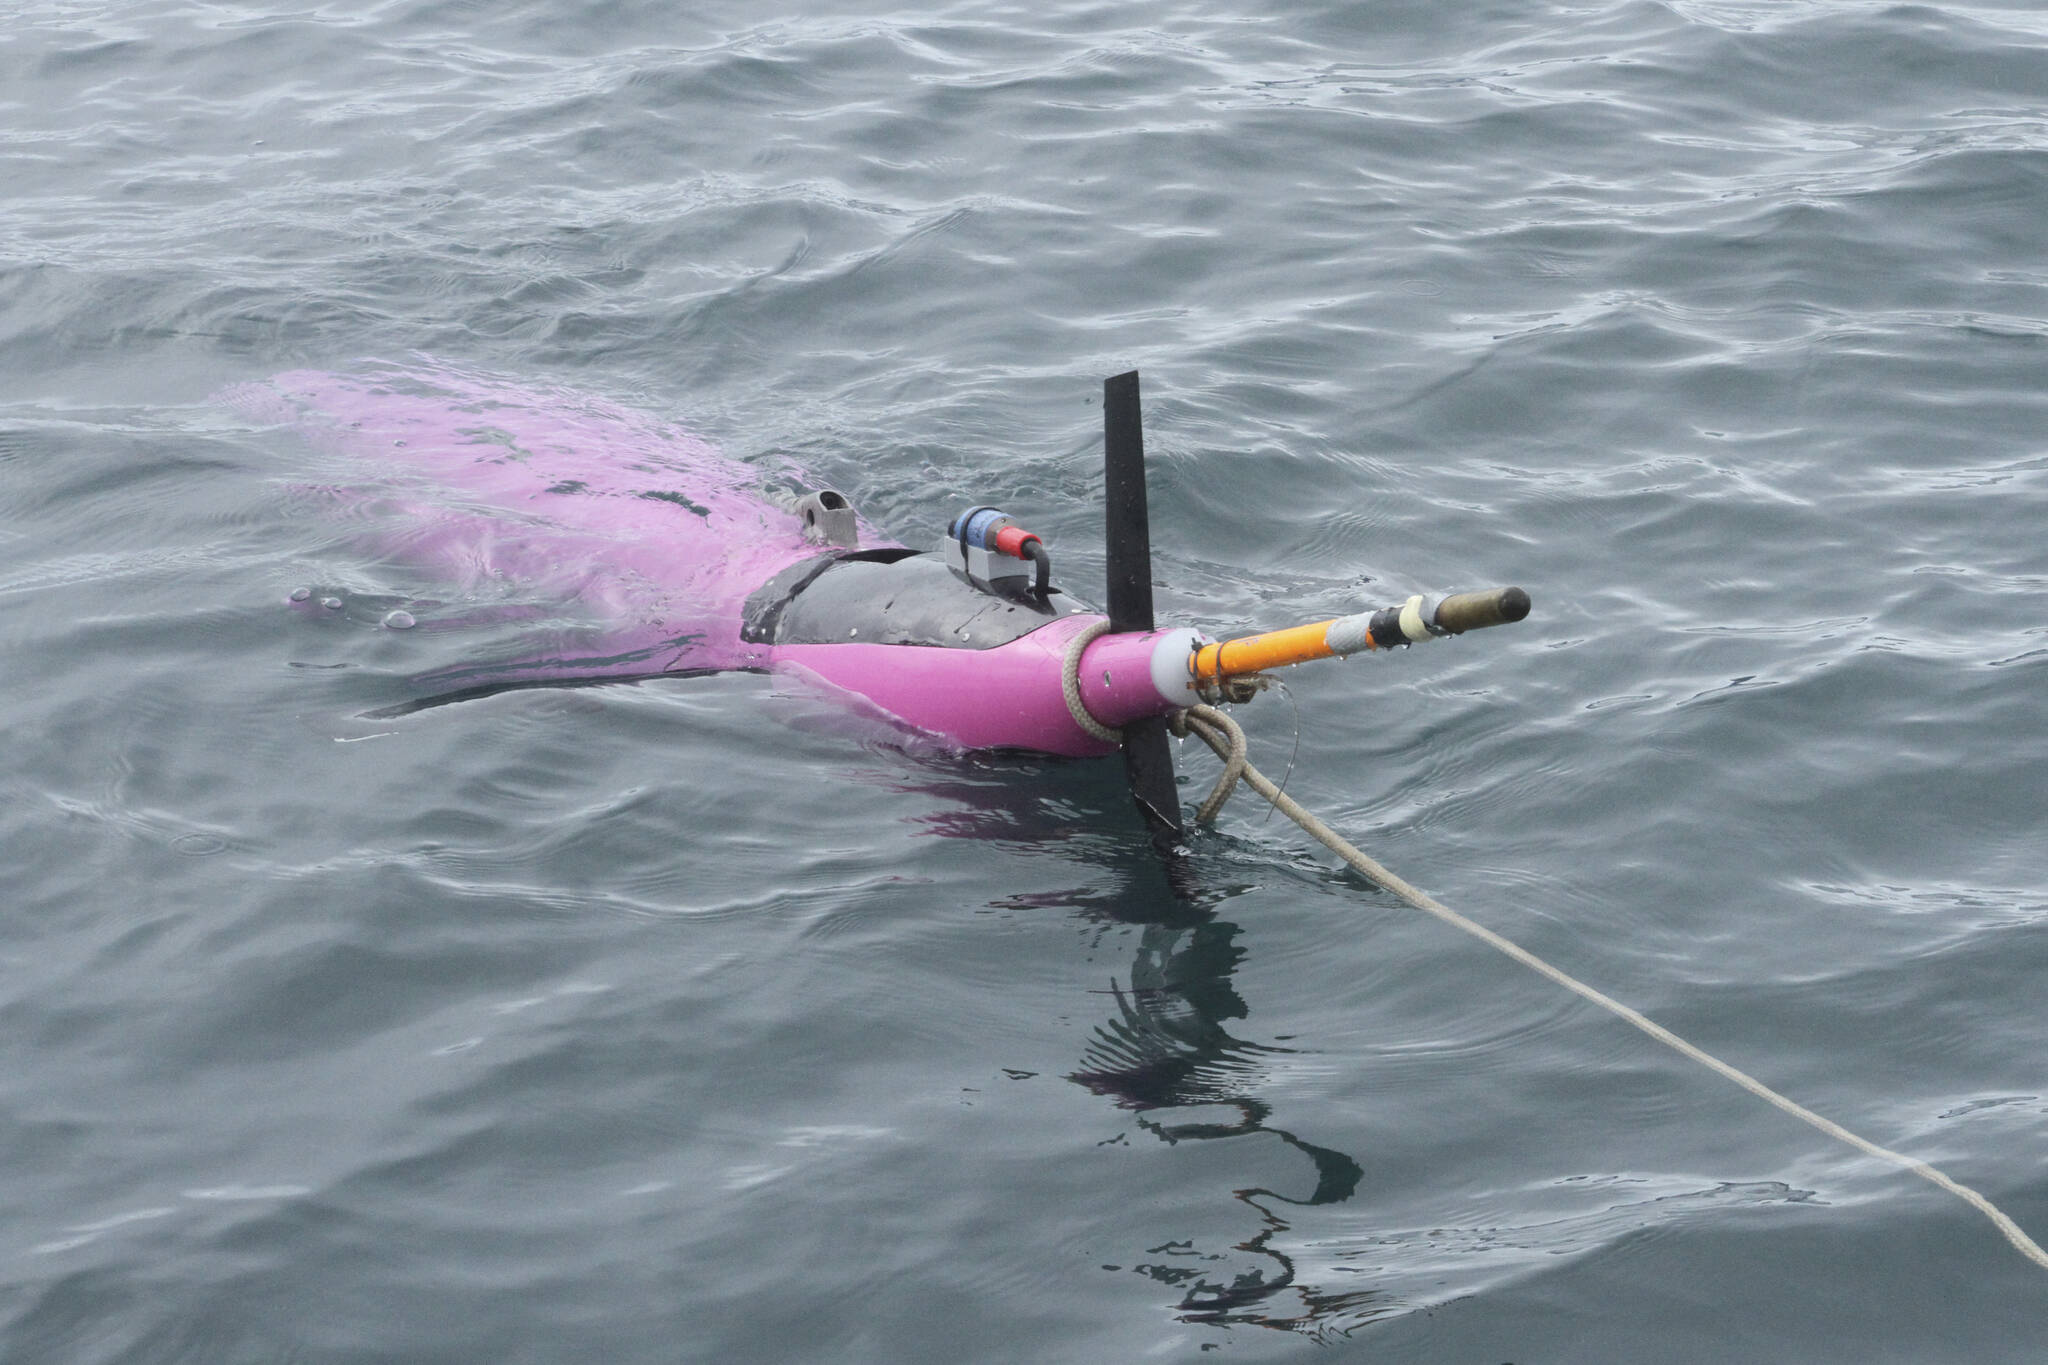 This May 4, 2022, photo shows an underwater glider bobbing in the Gulf of Alaska. The glider was fitted with special sensors to study ocean acidification. (AP Photo/Mark Thiessen)